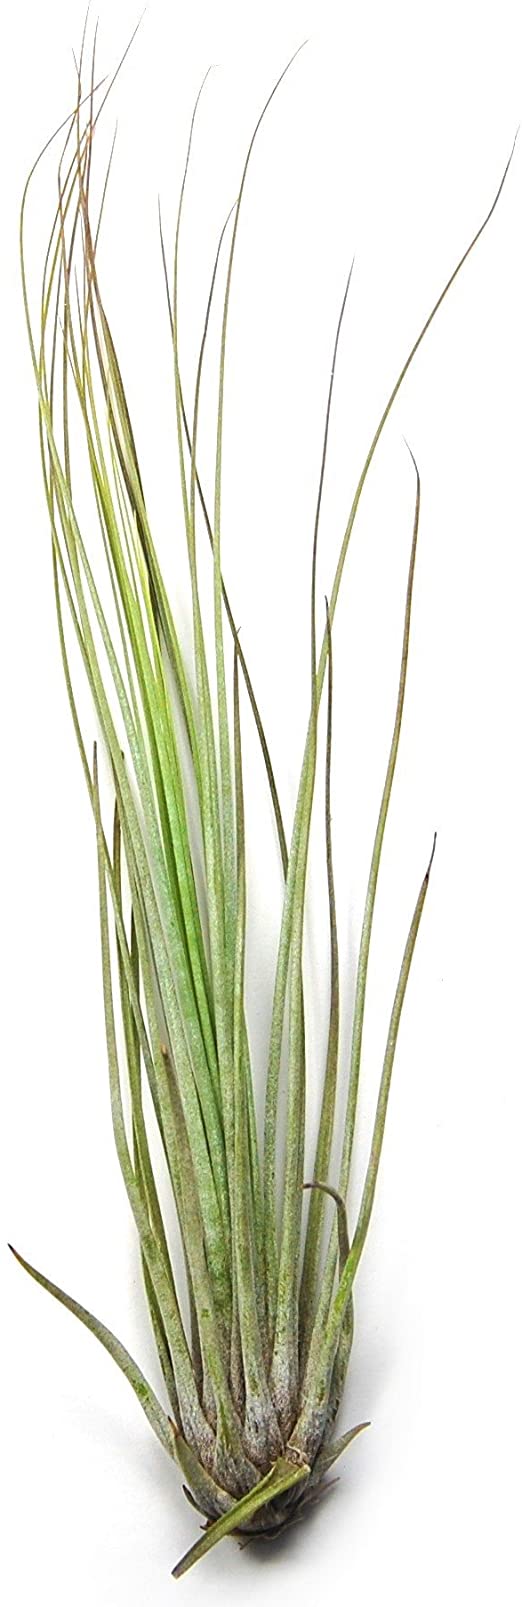 Air Plant Pack of 5 Juncifolia Air Plants - 30 Day Air Plant Guarantee - Free Air Plant Care & Design ebook with every order